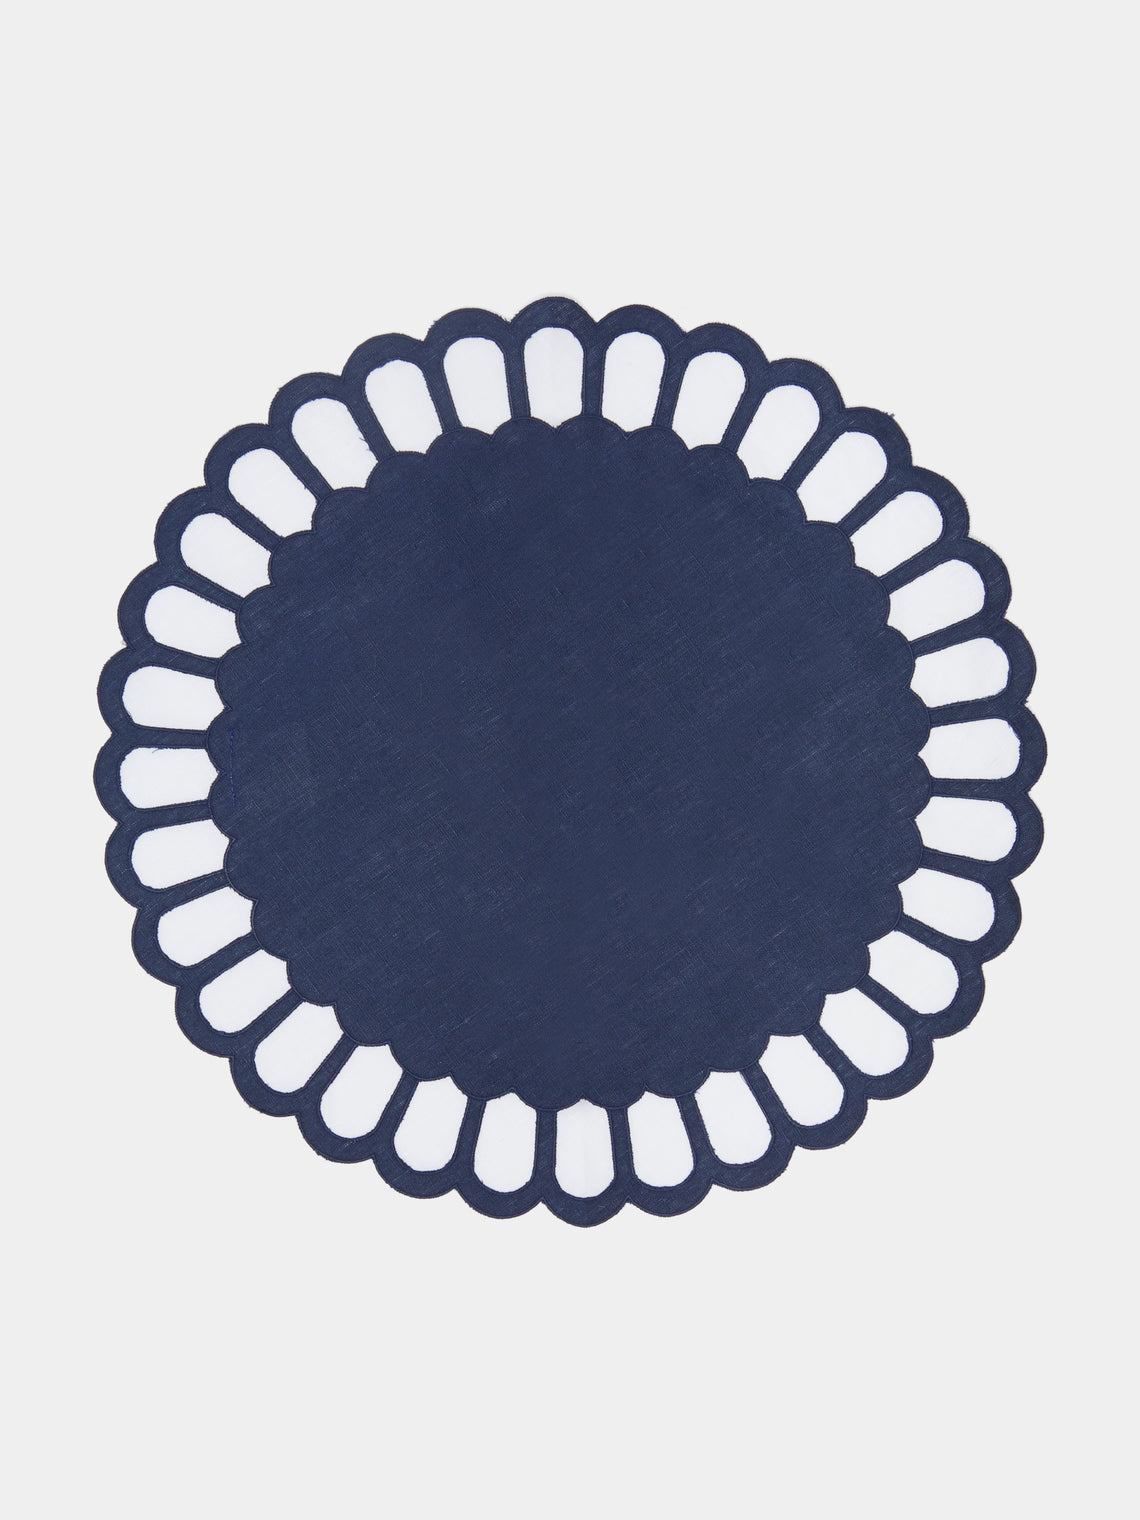 Los Encajeros - Zurbano Embroidered Linen Placemats (Set of 4) - Blue - ABASK - 